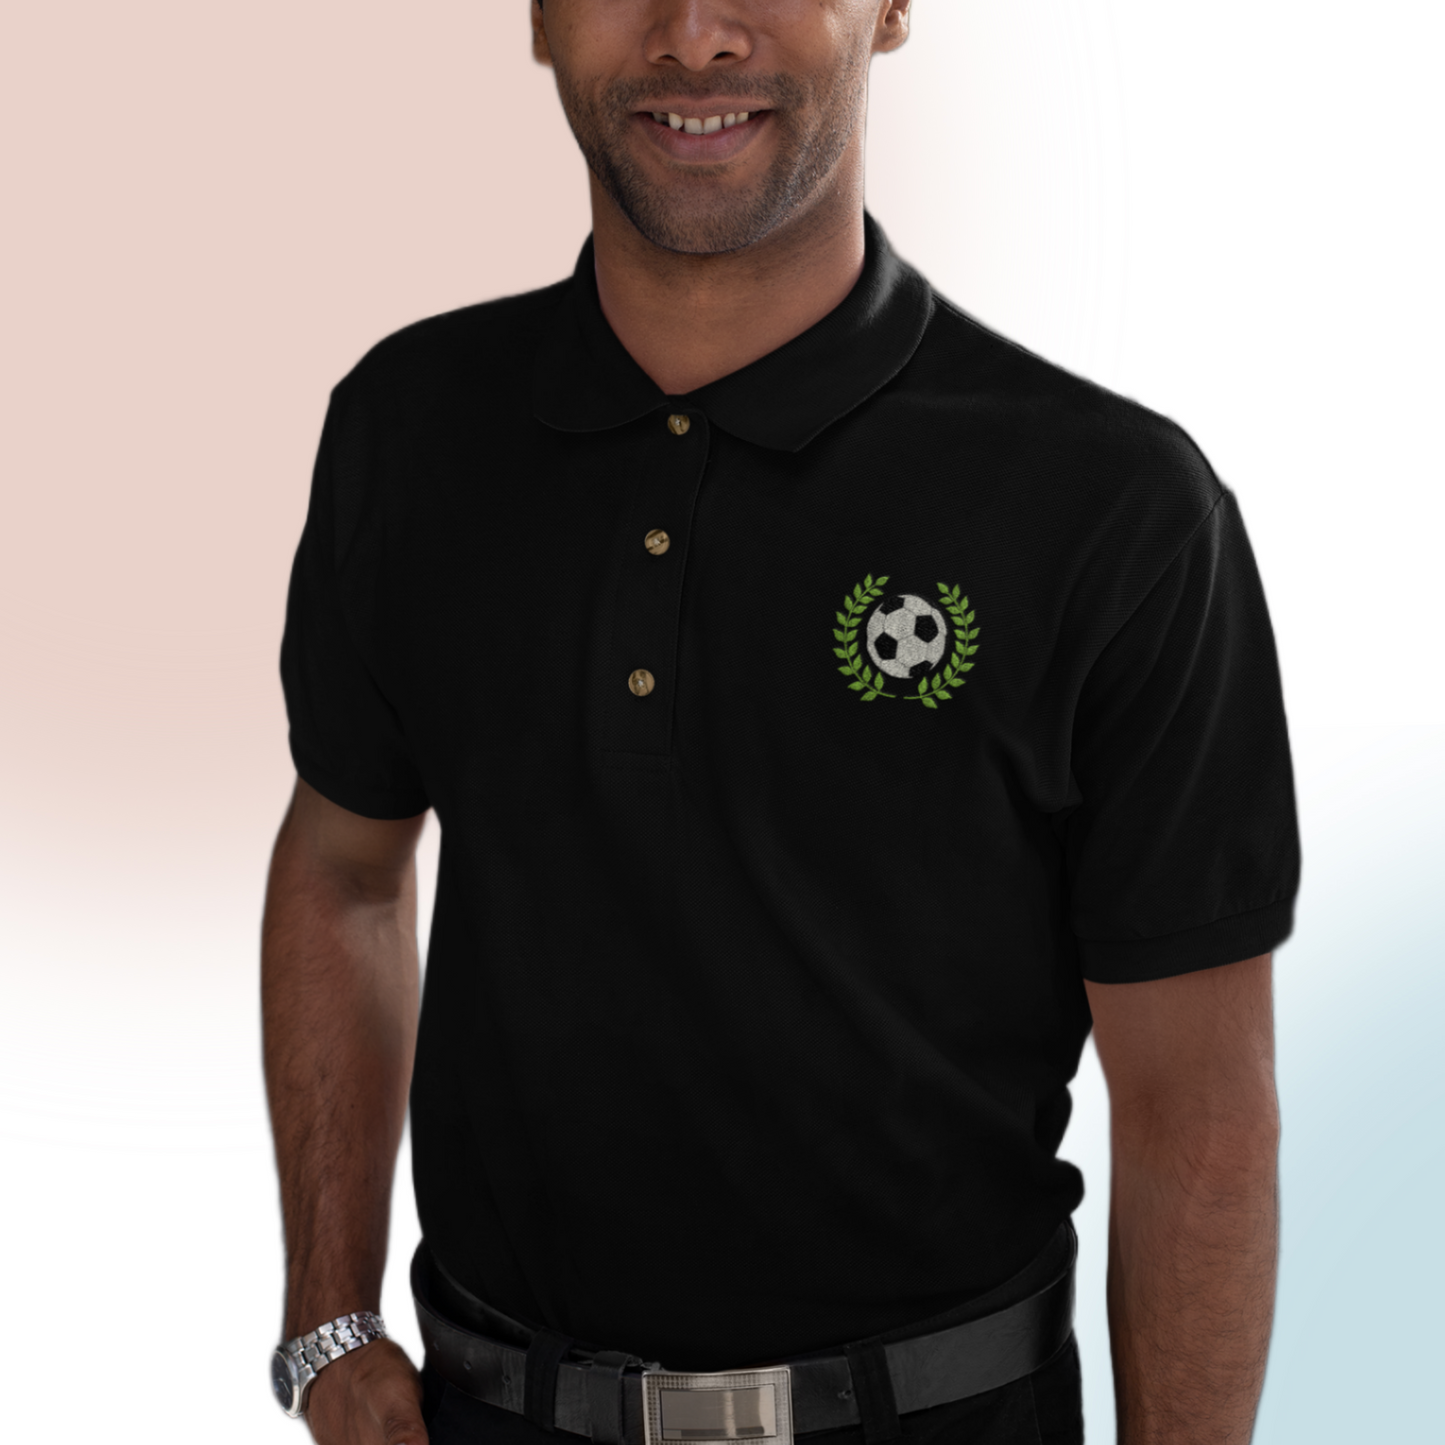 Football Graphic Polo T-shirt for Football Lovers Black